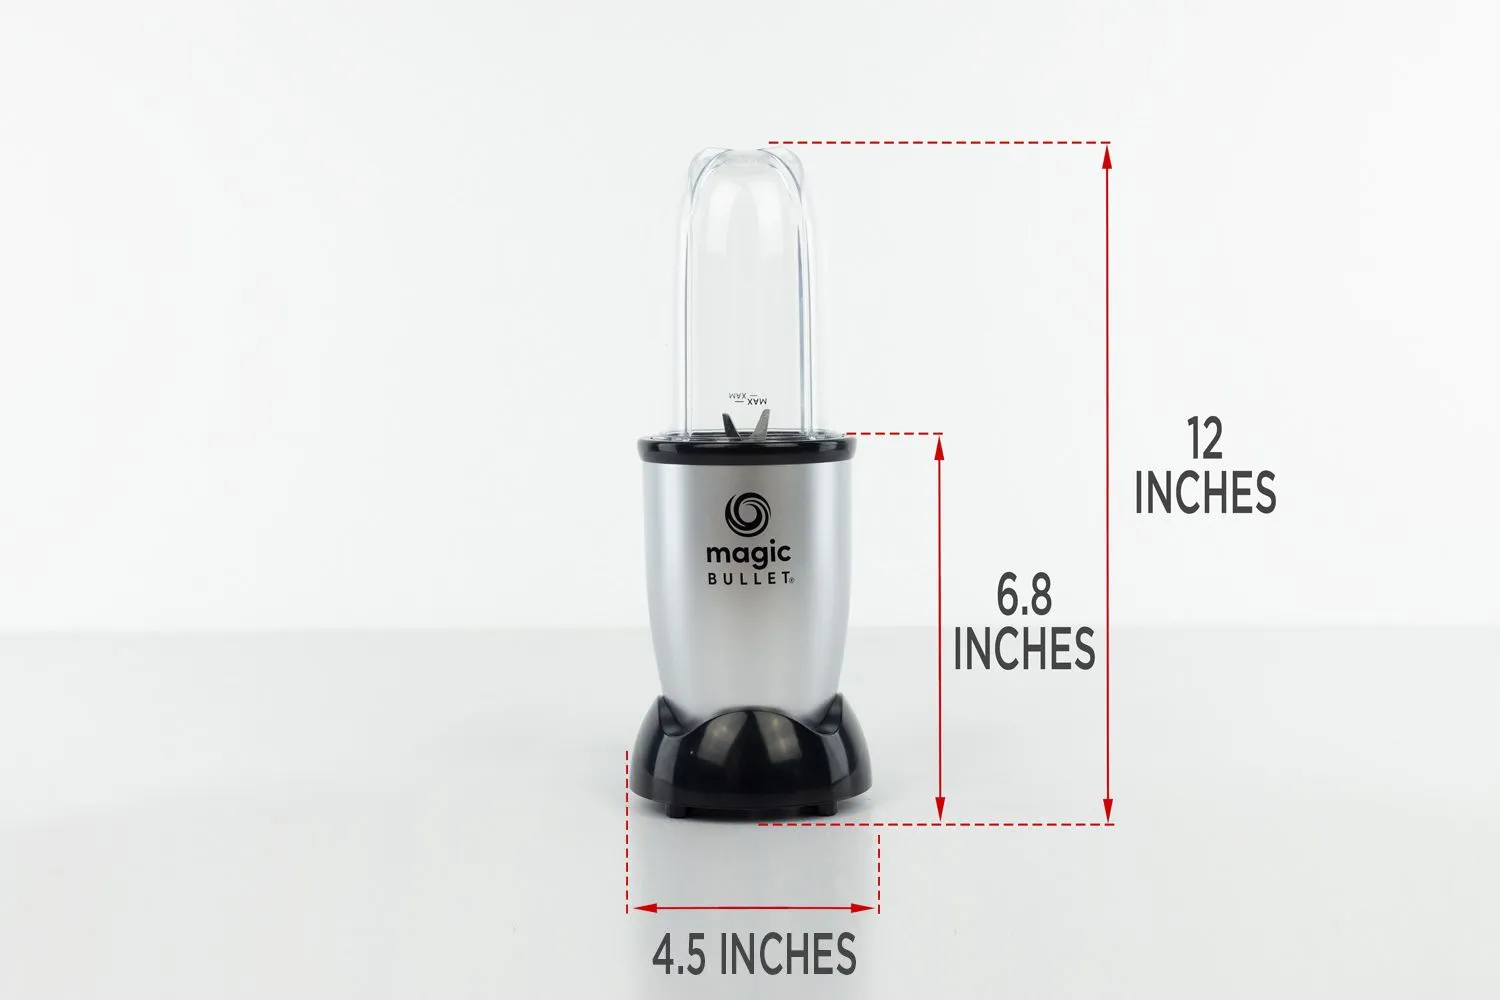 Review: We Tried the Magic Bullet Mini Juicer